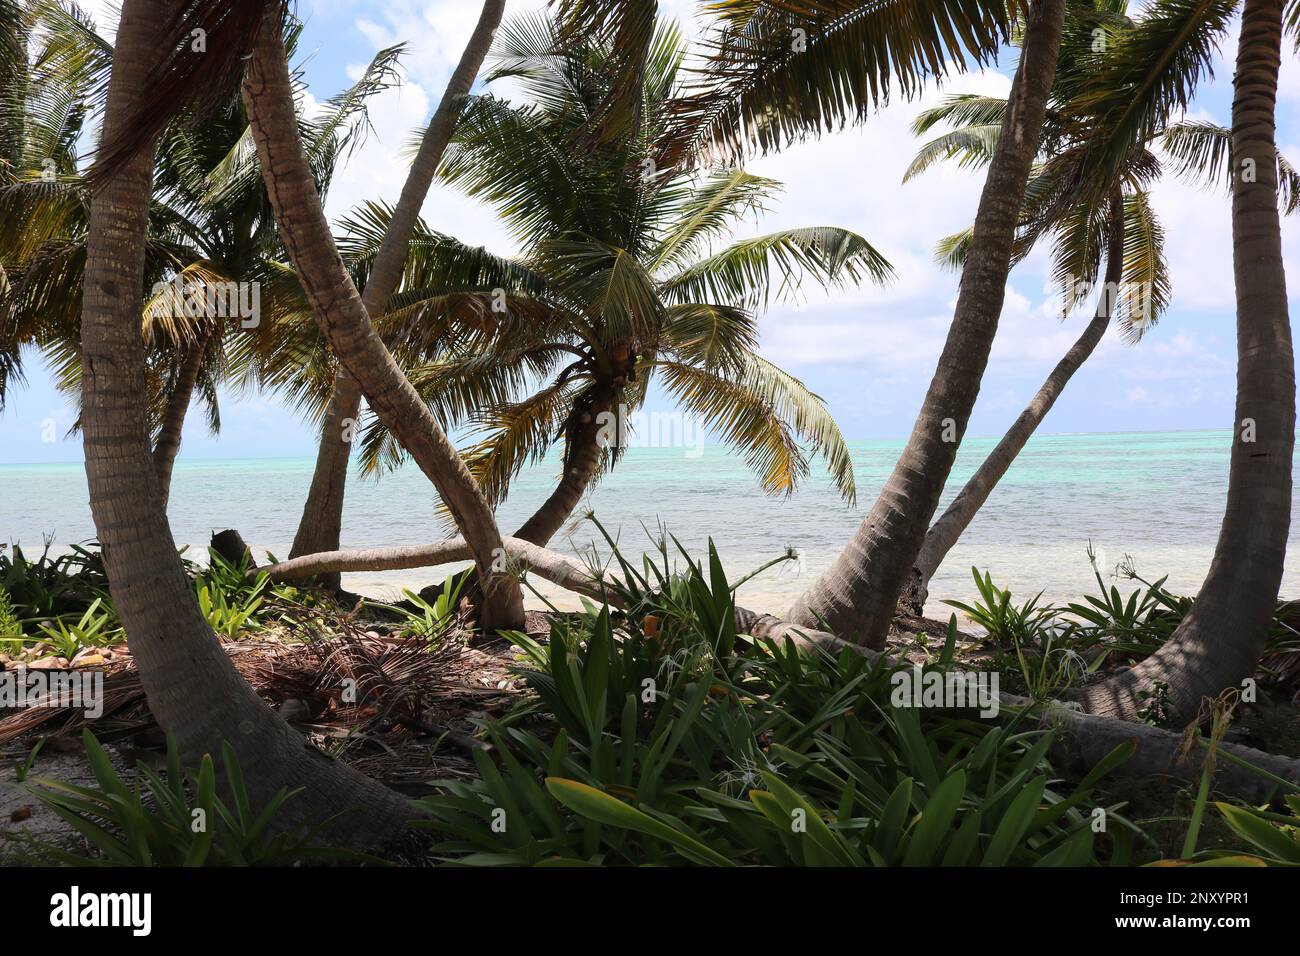 Atlantic Ocean viewed through palm trees at South Water Caye Marine Reserve,  Belize Barrier Reef Stock Photo